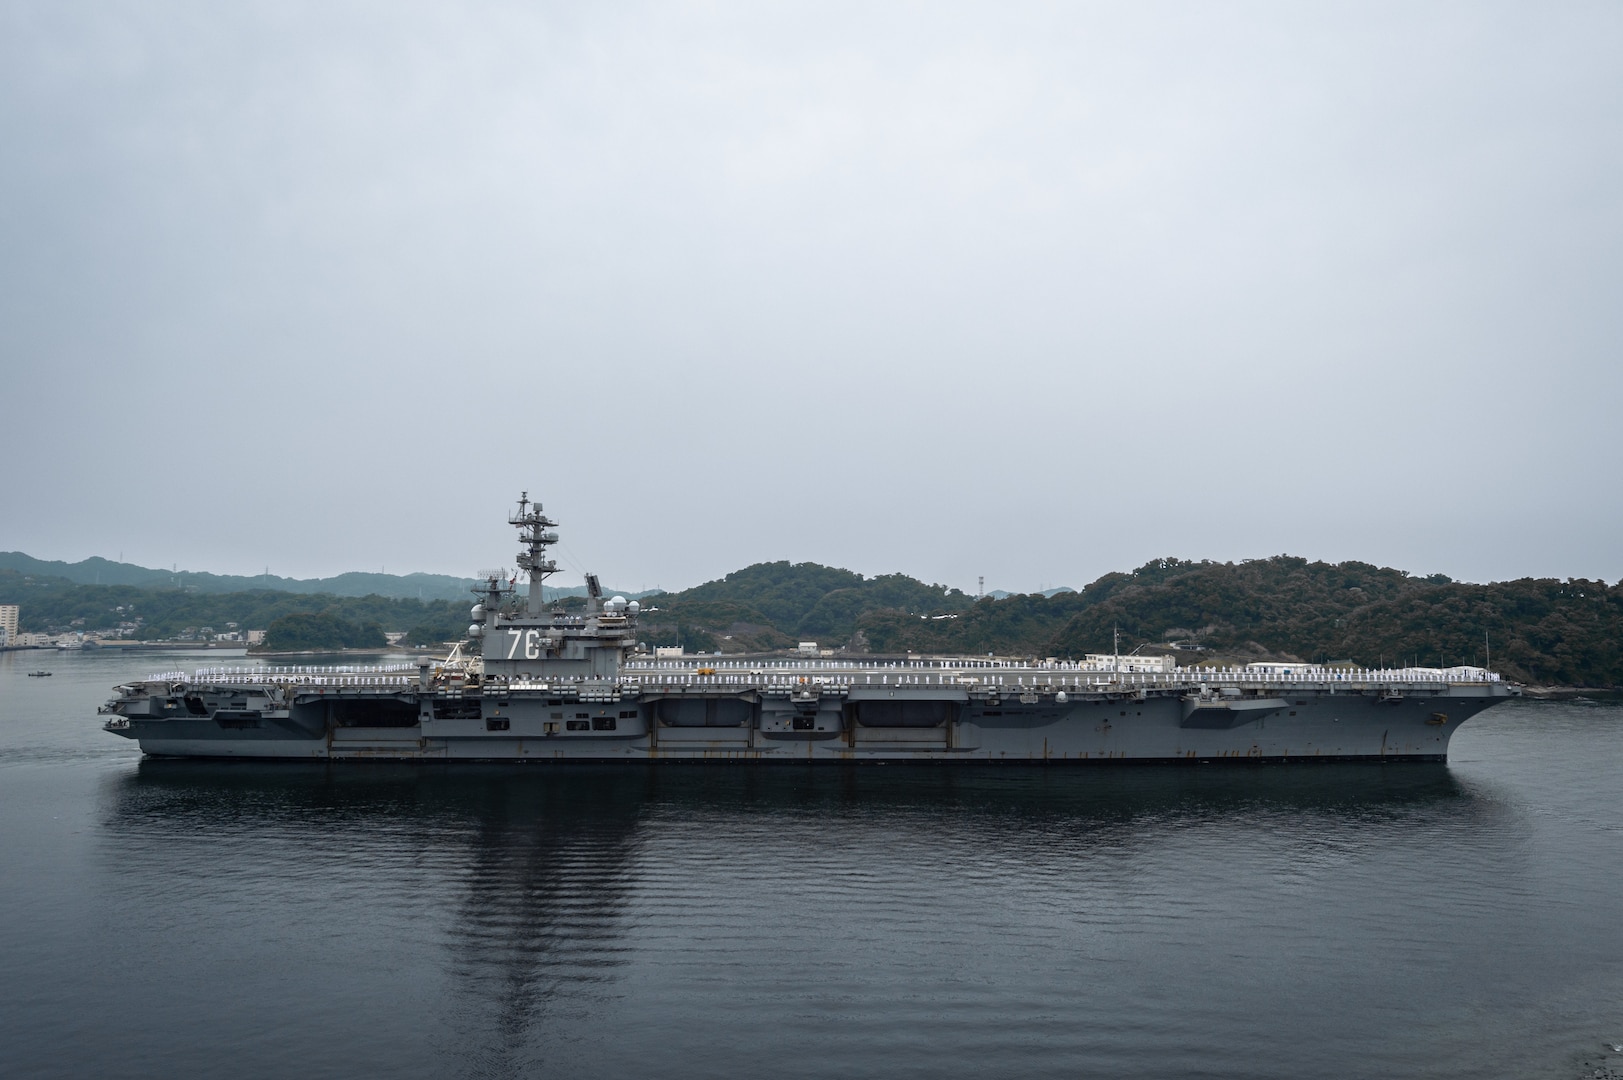 The U.S. Navy's only forward-deployed aircraft carrier, USS Ronald Reagan (CVN 76) departs Commander, Fleet Activities Yokosuka (CFAY) for a regularly scheduled deployment, May 20, 2022. Ronald Reagan is deployed to the U.S. 7th Fleet area of operations in support of a free and open Indo-Pacific region. For more than 75 years, CFAY has provided, maintained and operated base facilities and services in support of the U.S. 7th Fleet's forward-deployed naval forces, tenant commands, and thousands of military and civilian personnel and their families. (U.S. Navy photo by Seaman Darren Cordoviz)